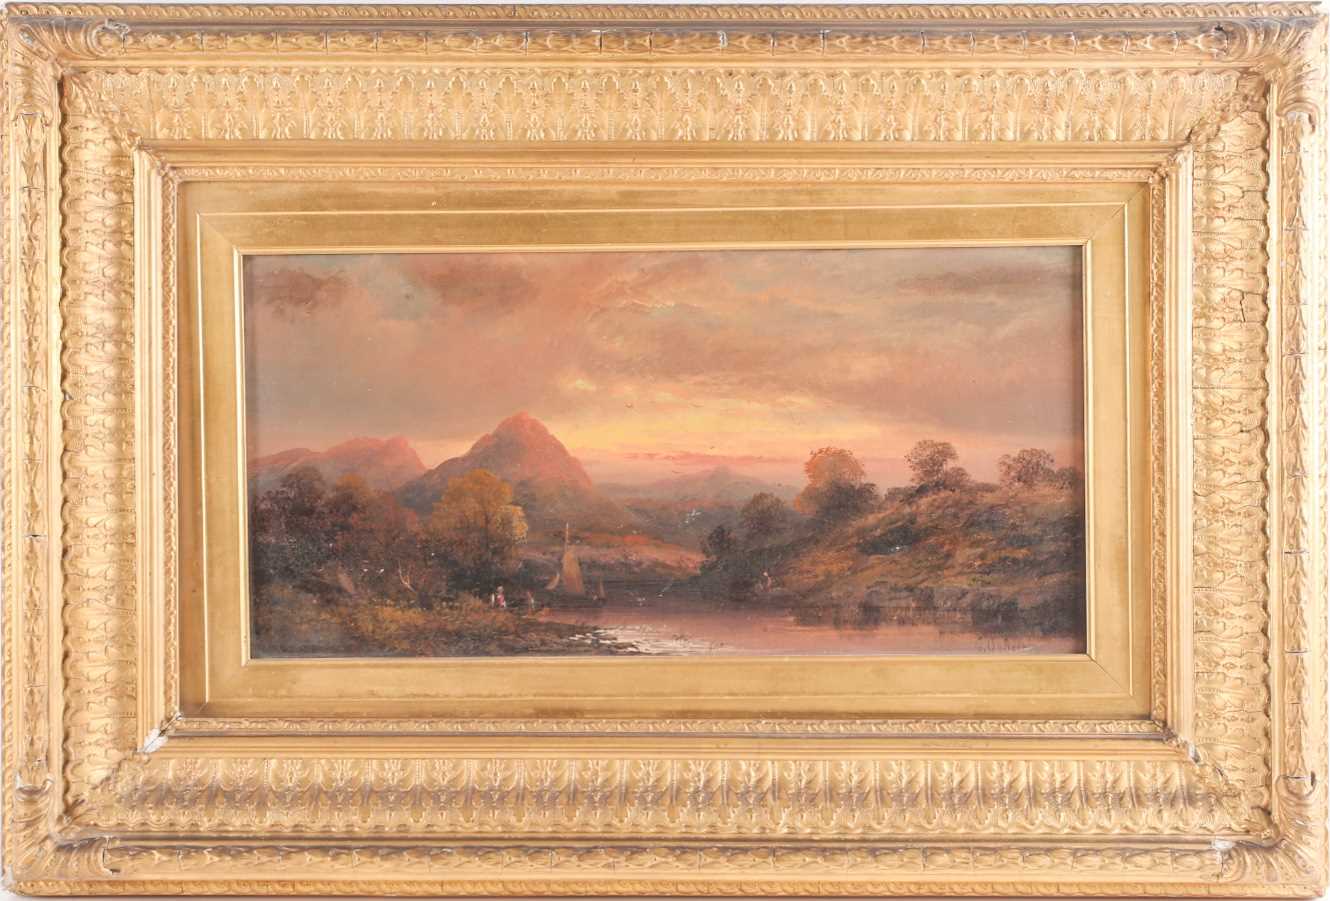 G Osborne (19th Century British School), Figures on the riverbank at sunset, oil on canvas, signed